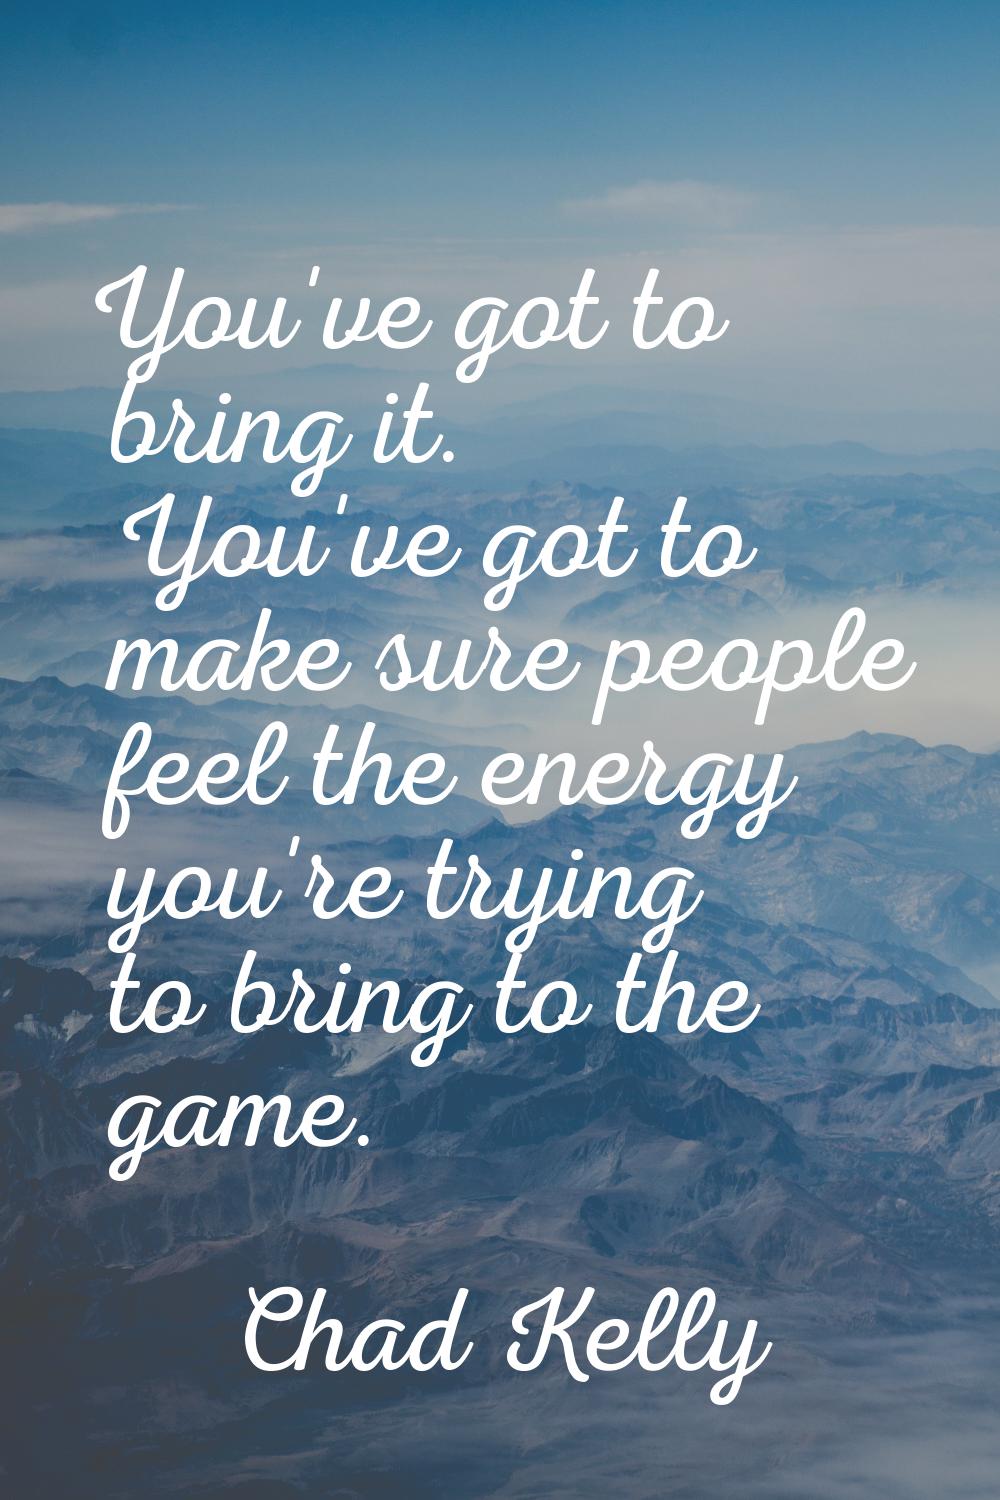 You've got to bring it. You've got to make sure people feel the energy you're trying to bring to th